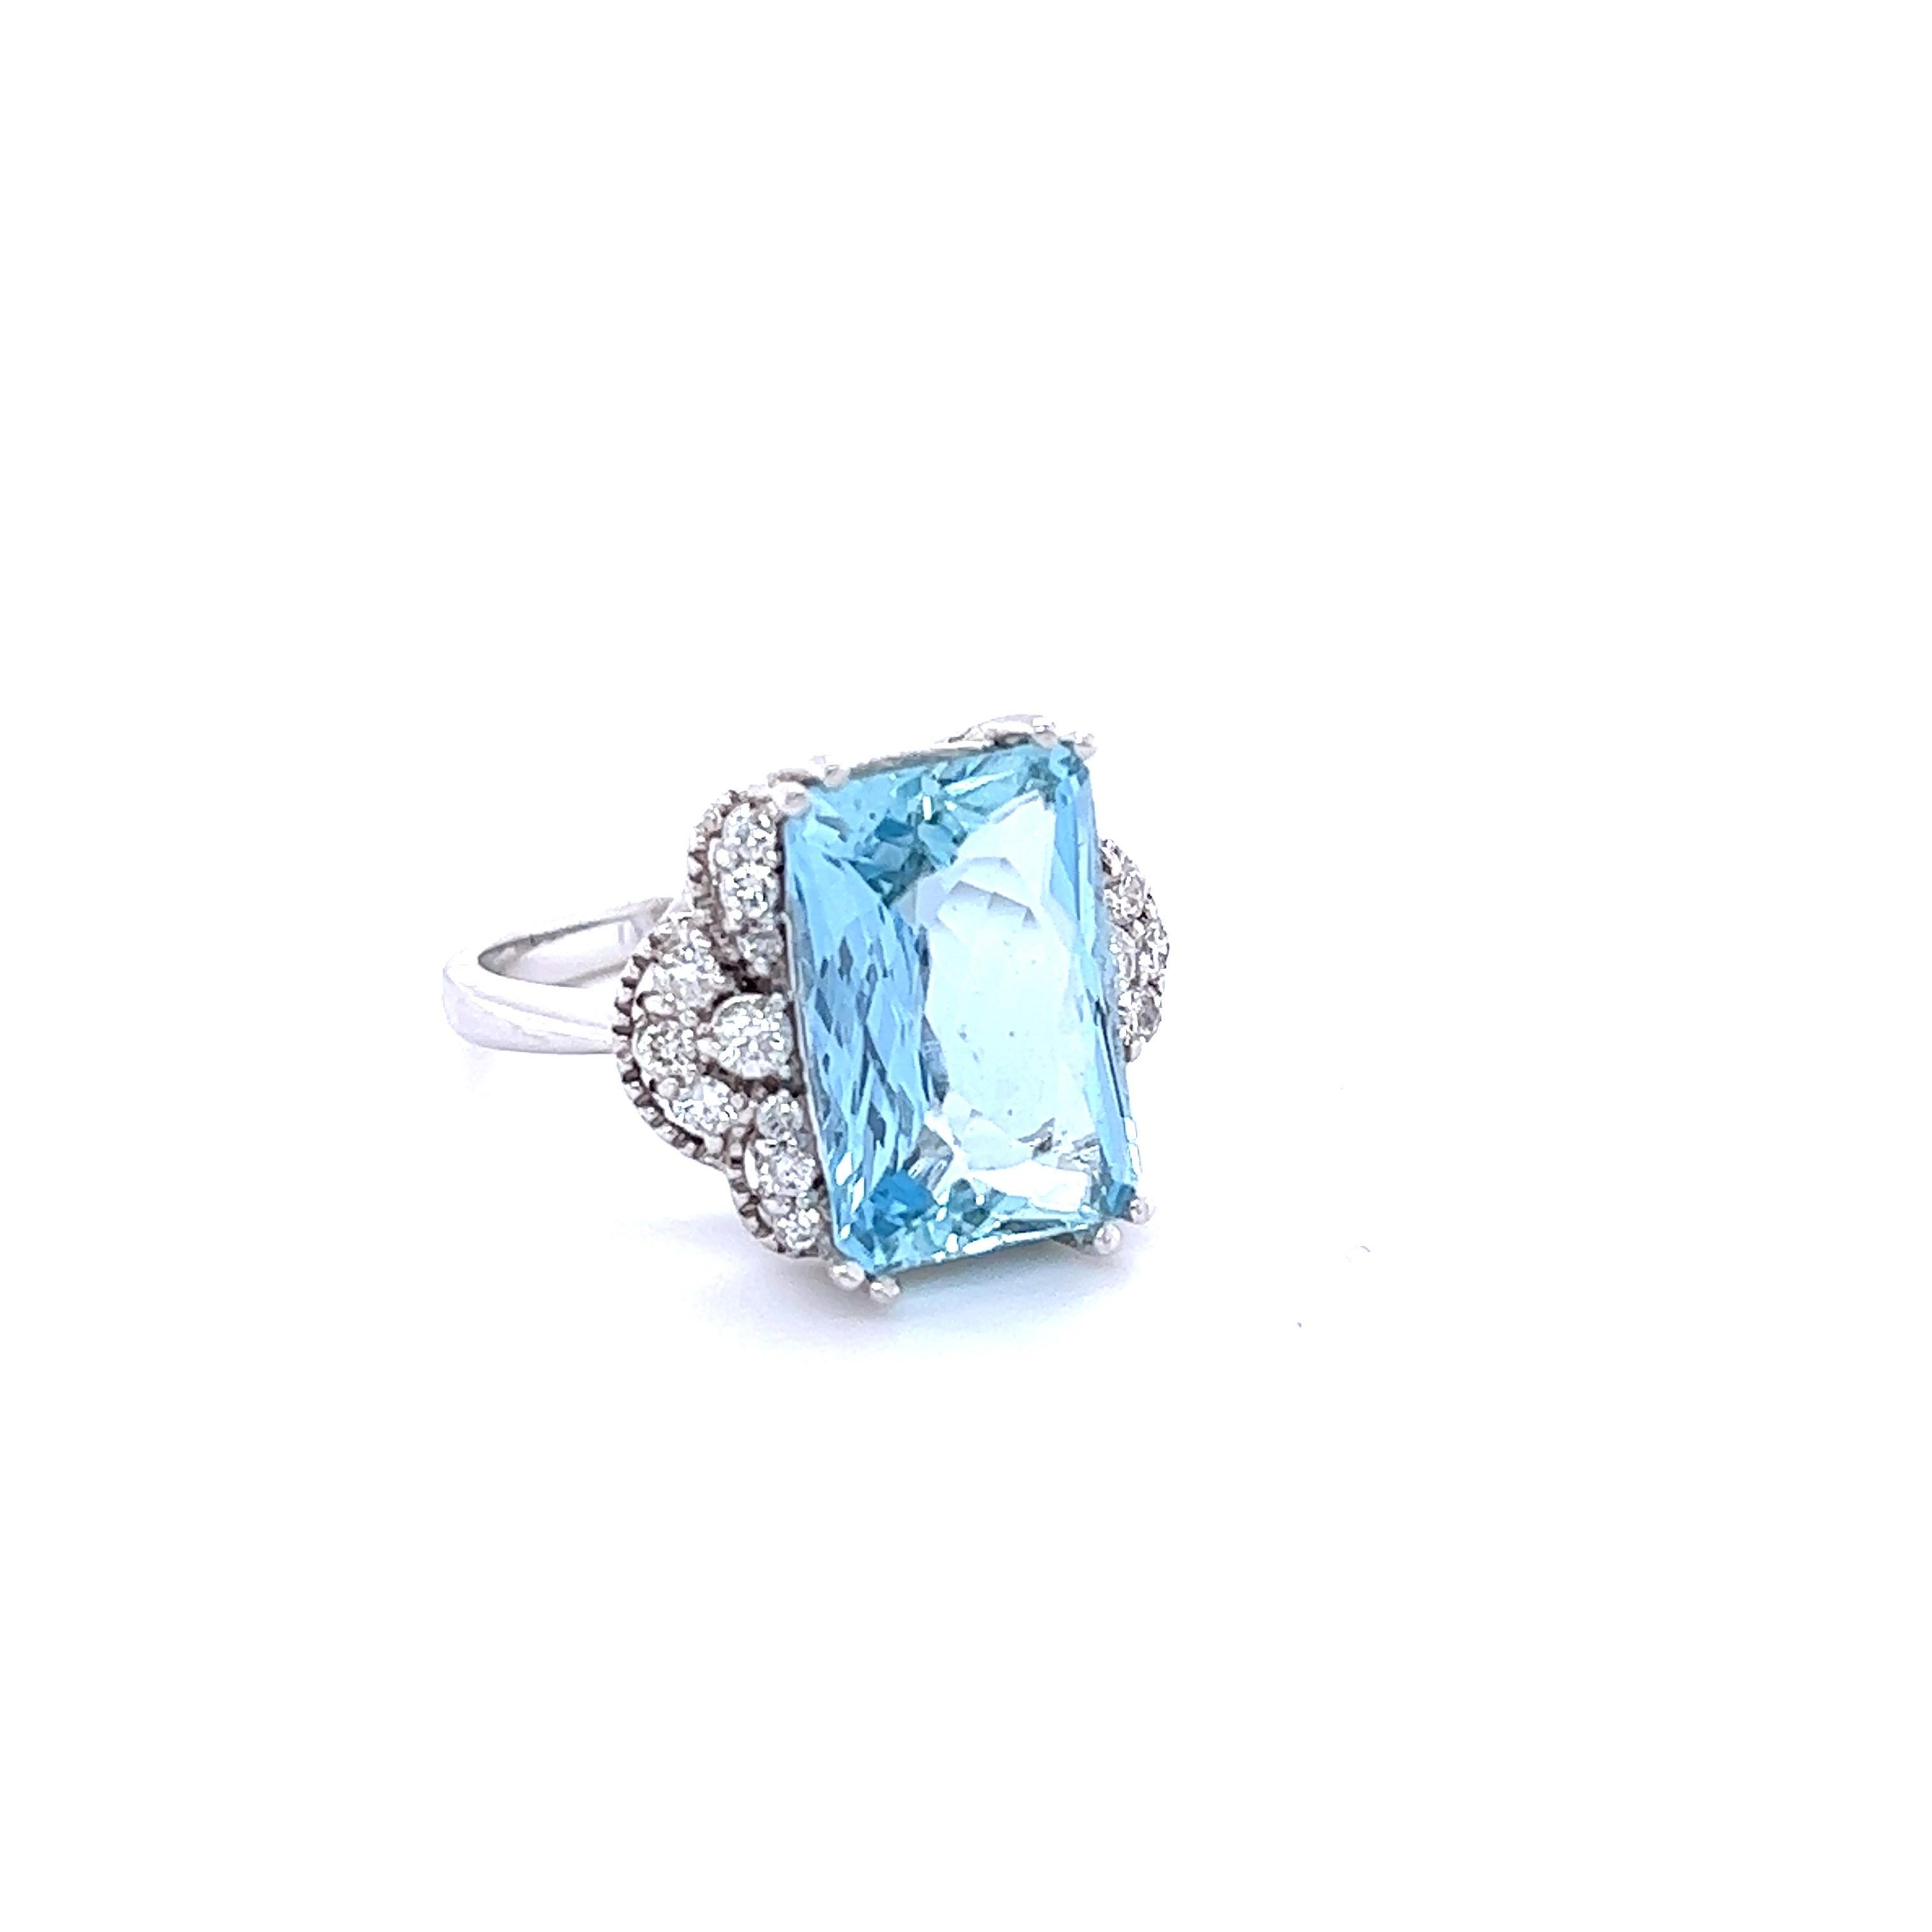 This ring has a 6.12 Carat Emerald Cut Aquamarine set in the center of the ring and is surrounded by 20 Round Cut Diamonds that weigh 0.44 carat (Clarity: VS2, Color: F). The total carat weight of this ring is 6.56 carats. 
The Aquamarine measures